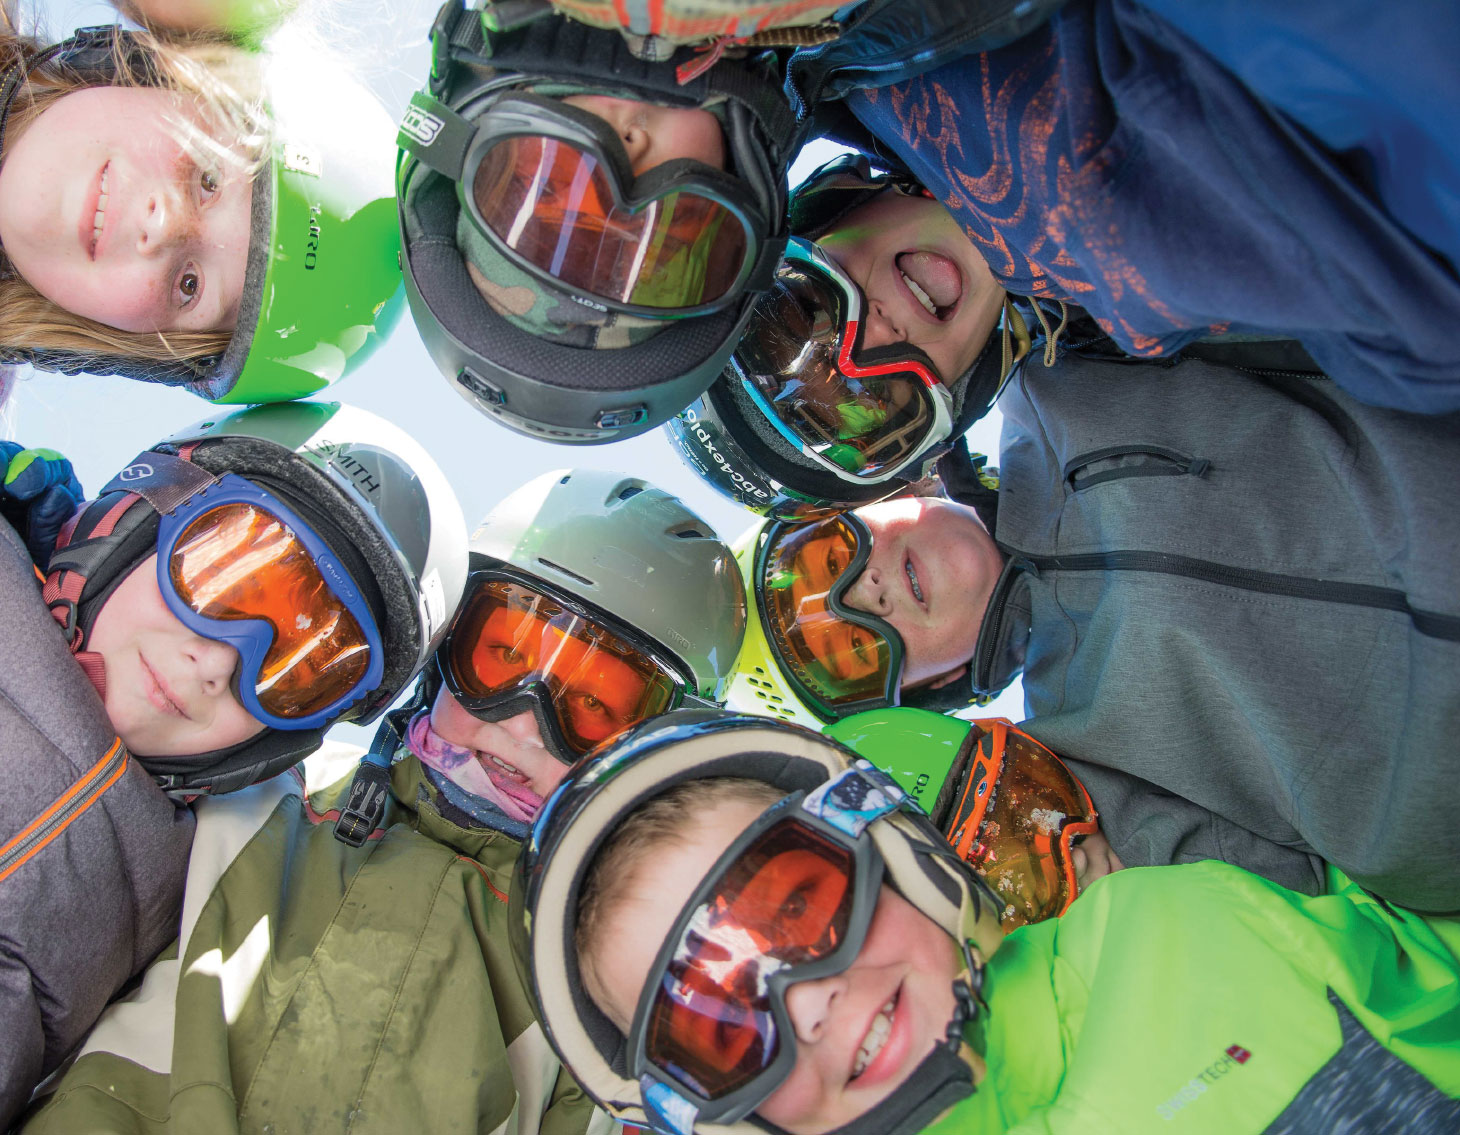 Group of young snow sports enthusiasts looking down at camera